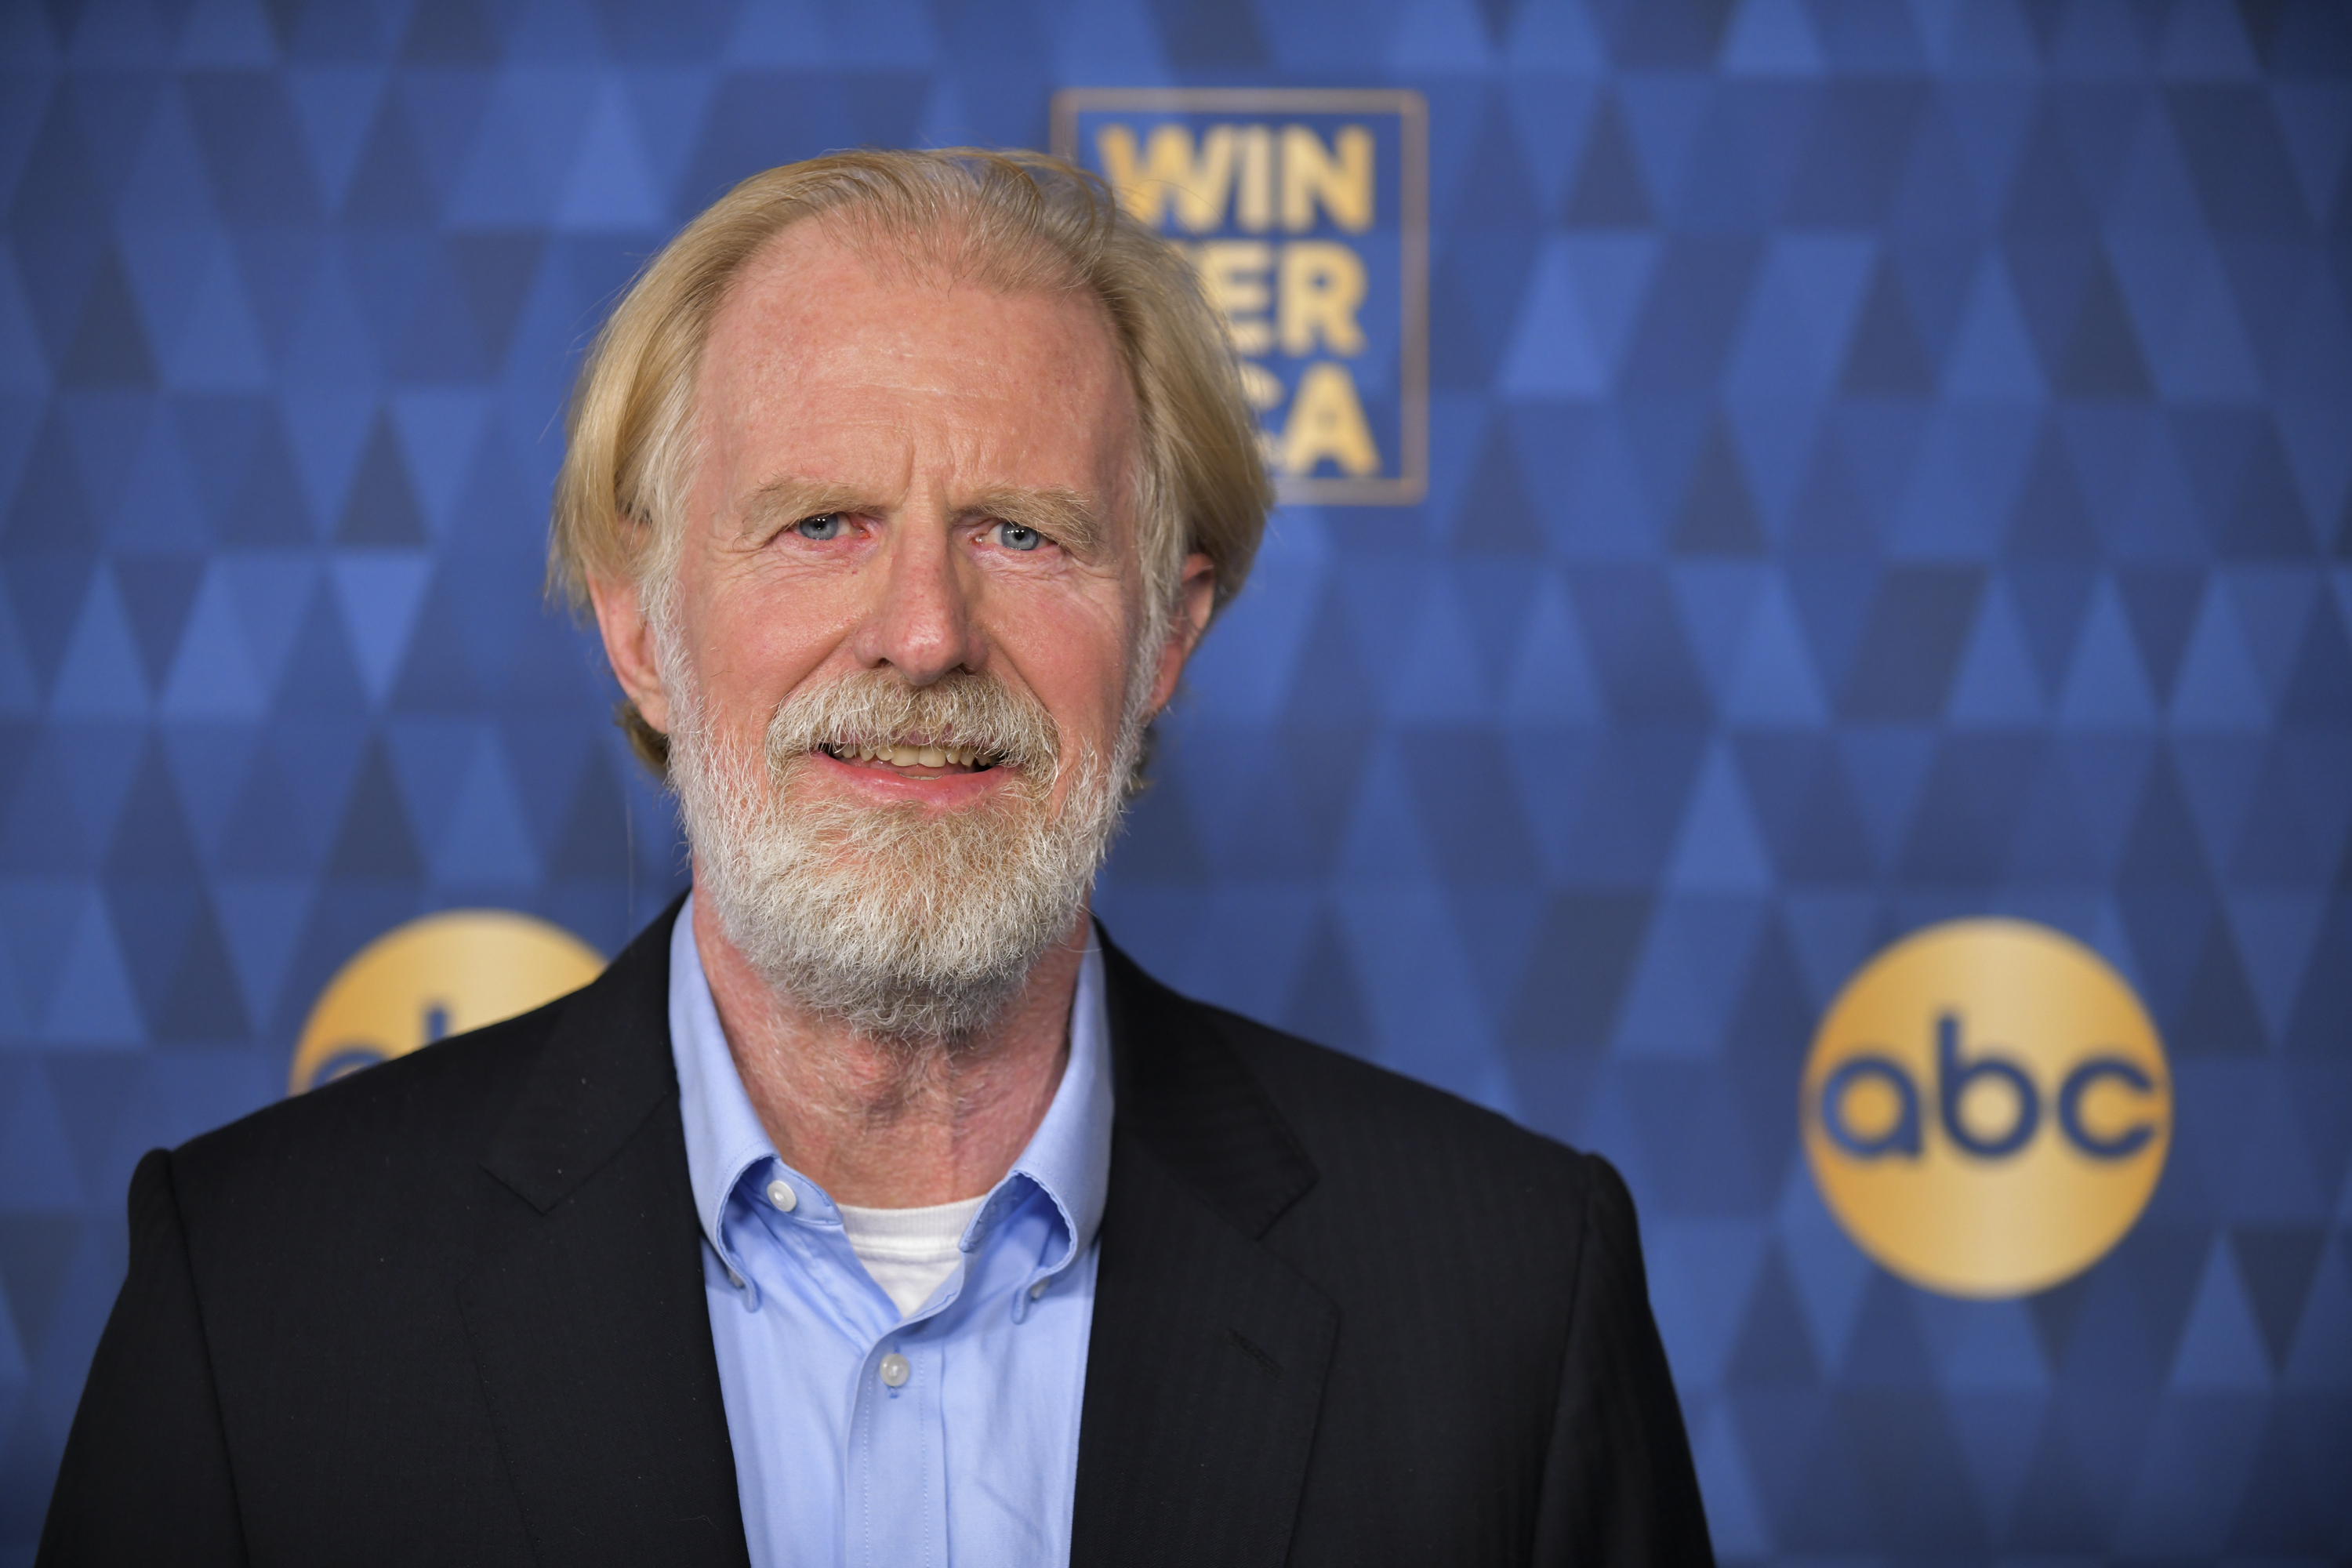 Ed Begley Jr. at ABC Television's Winter Press Tour in Pasadena, California on January 8, 2020 | Source: Getty Images